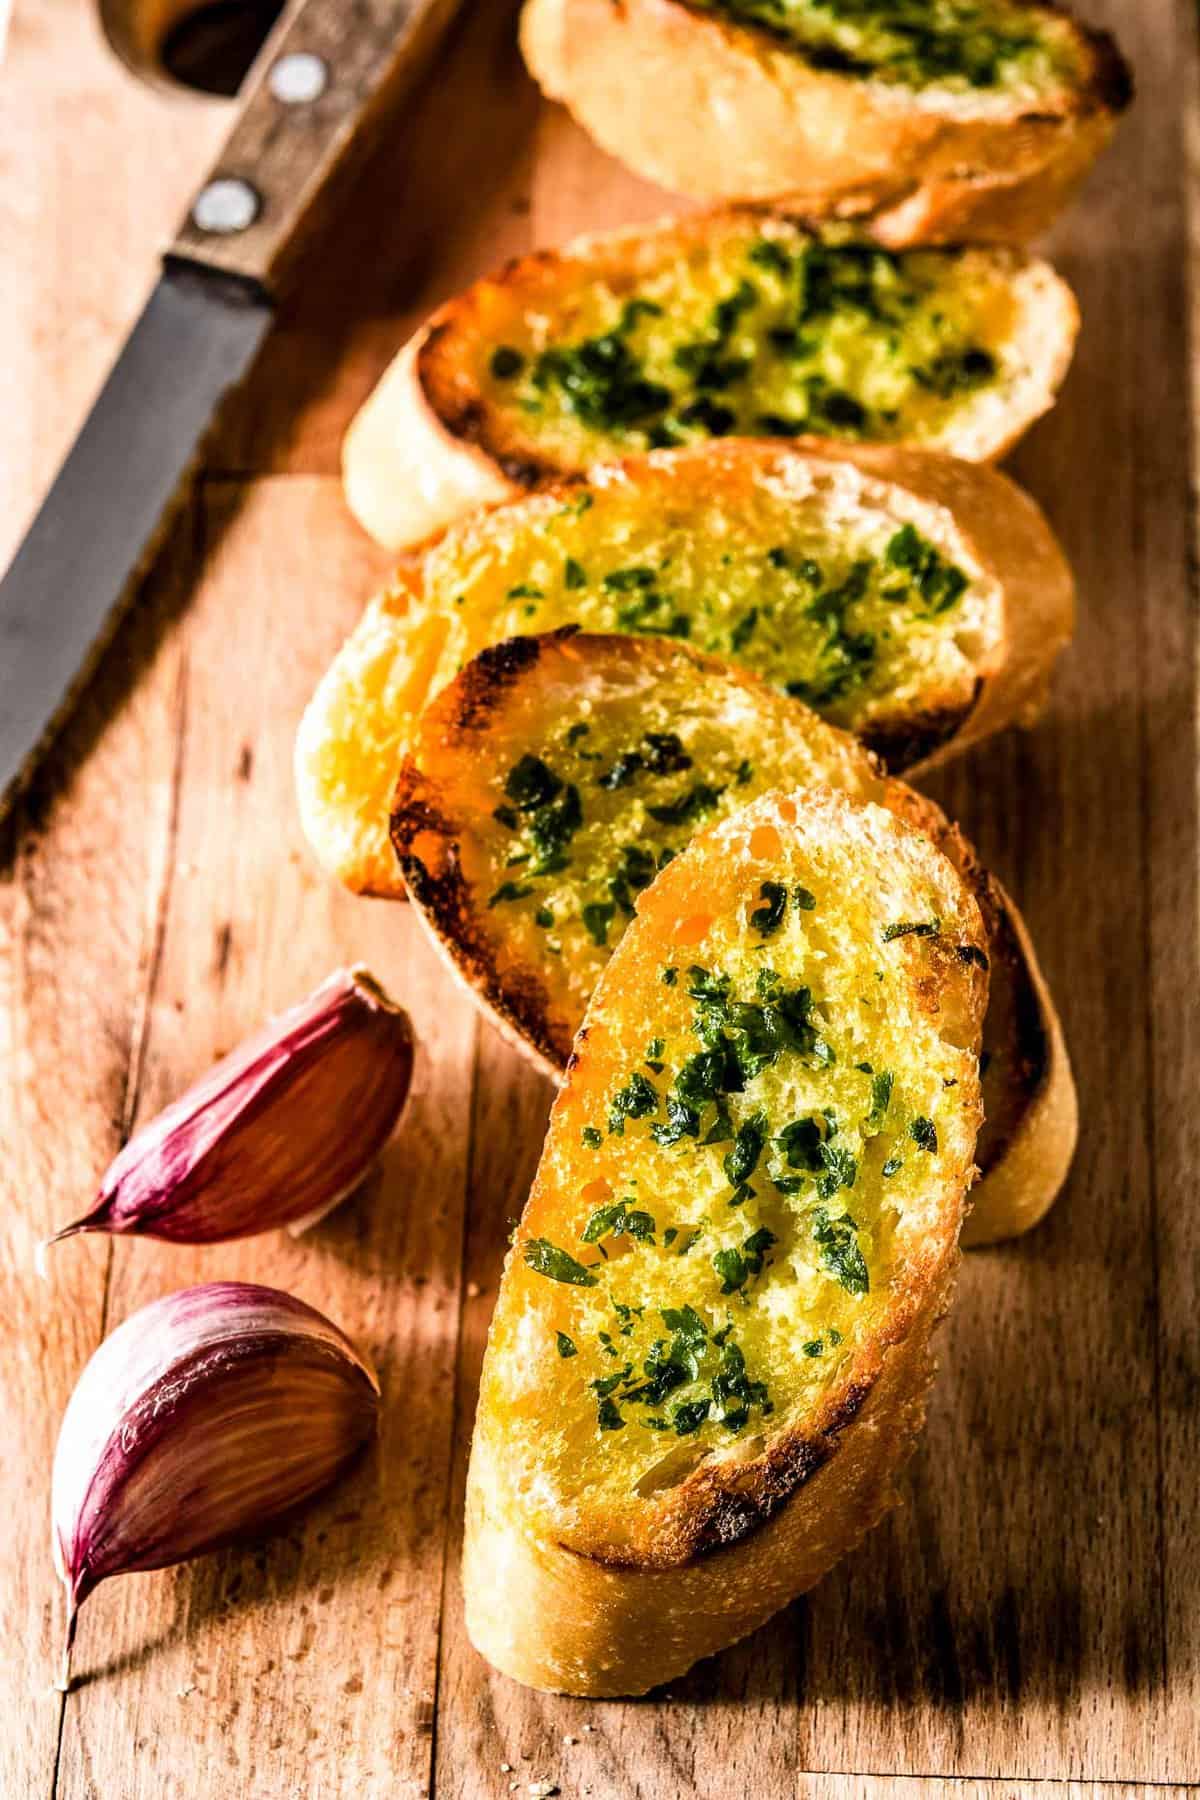 Slices of garlic bread on a wooden board with a knife and a couple of cloves of purple garlic.